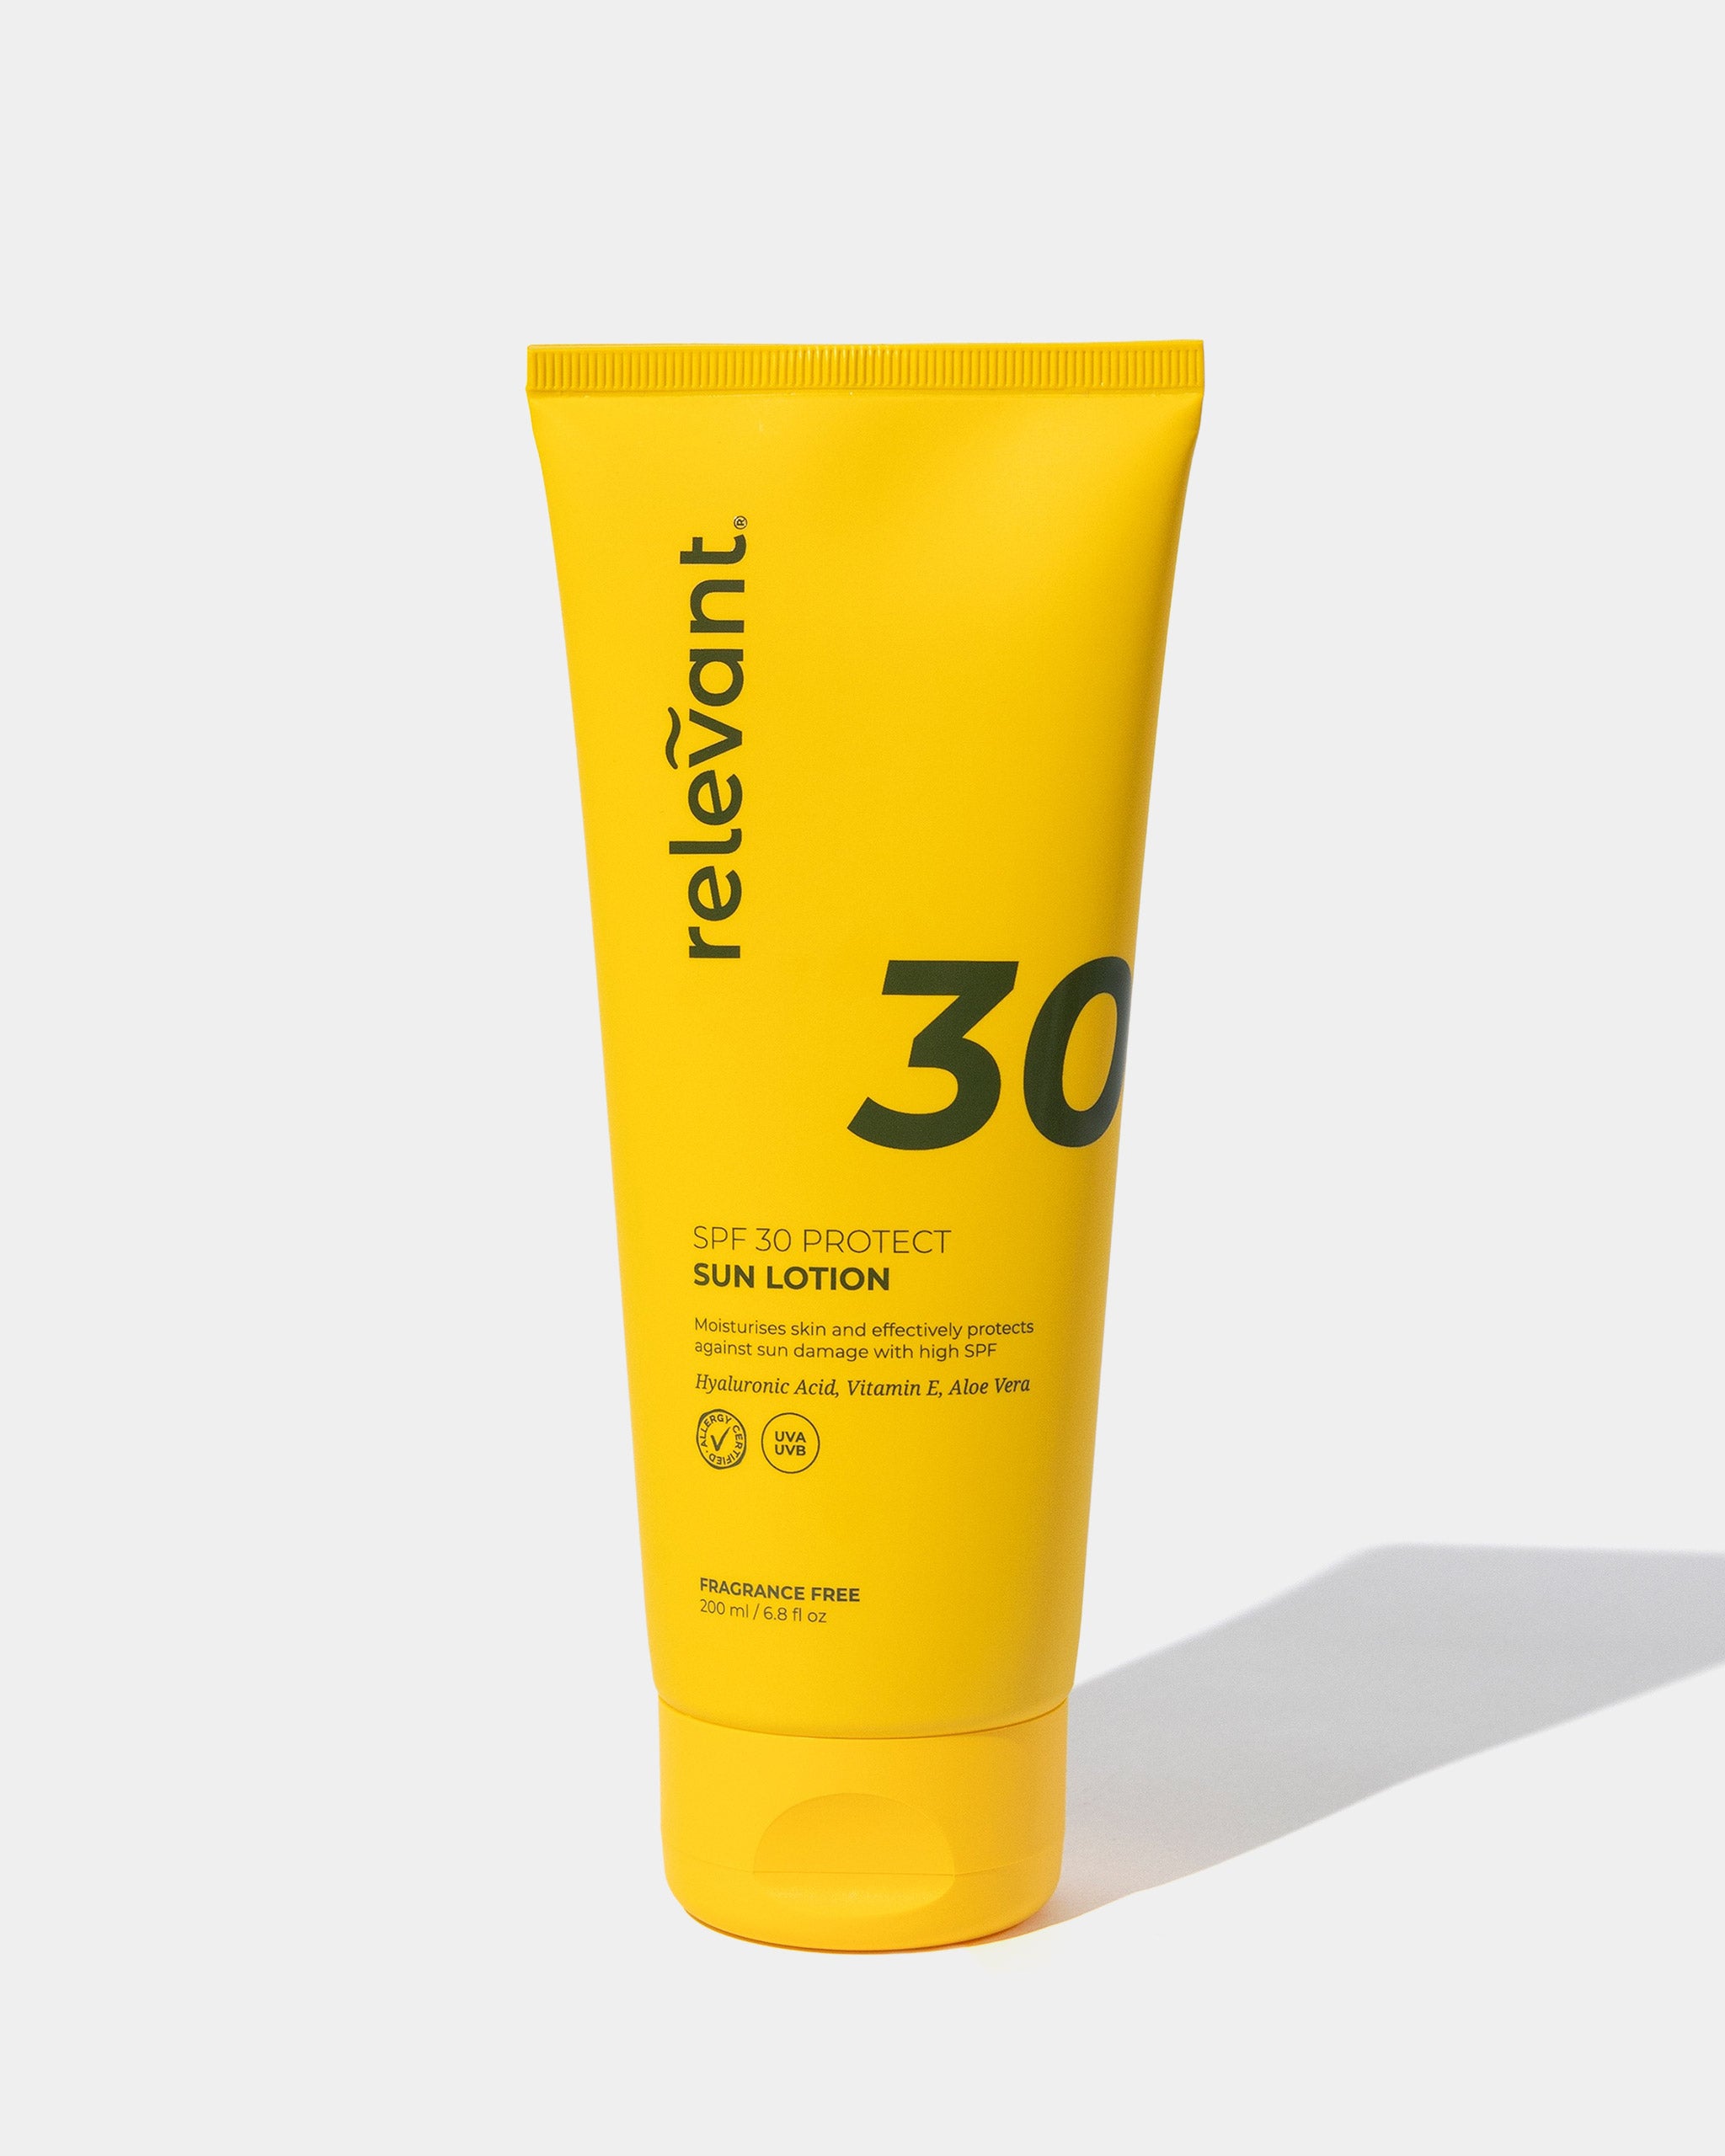 Relevant SPF 30 Protect Sun Lotion